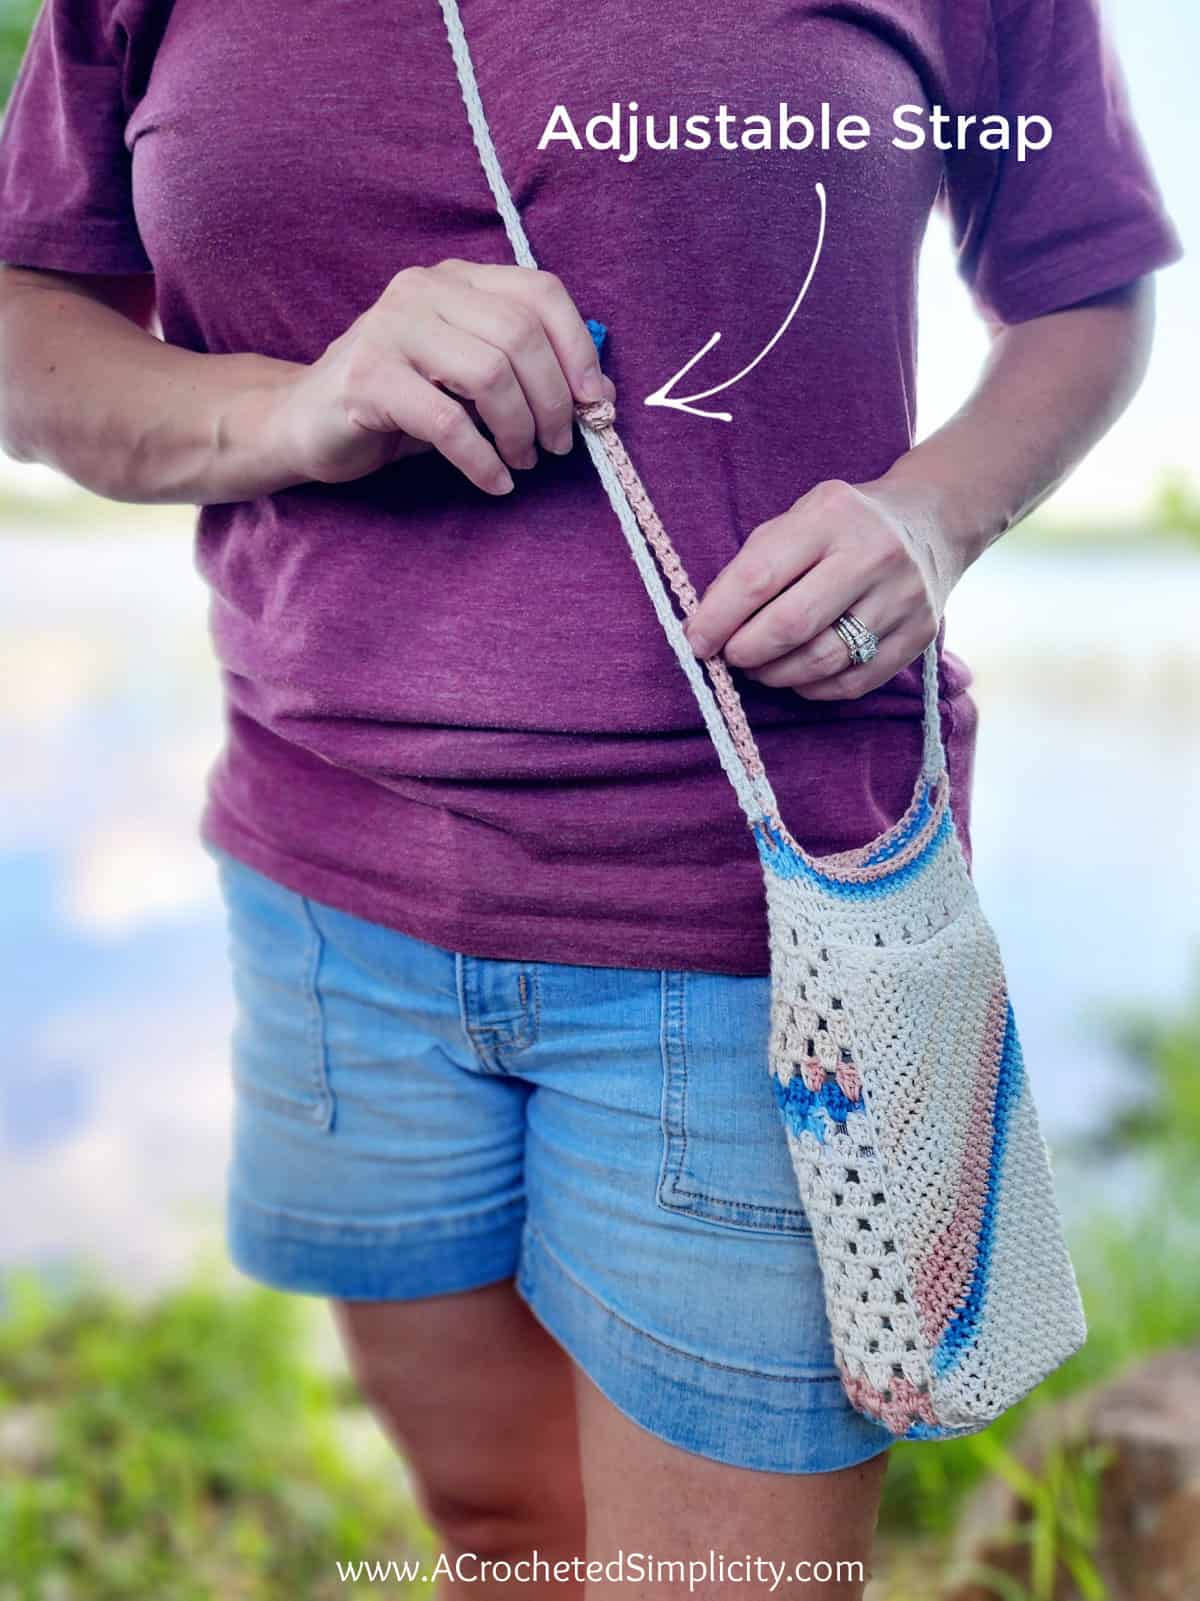 This photo is pointing out the adjustable crochet strap on the water bottle carrier.